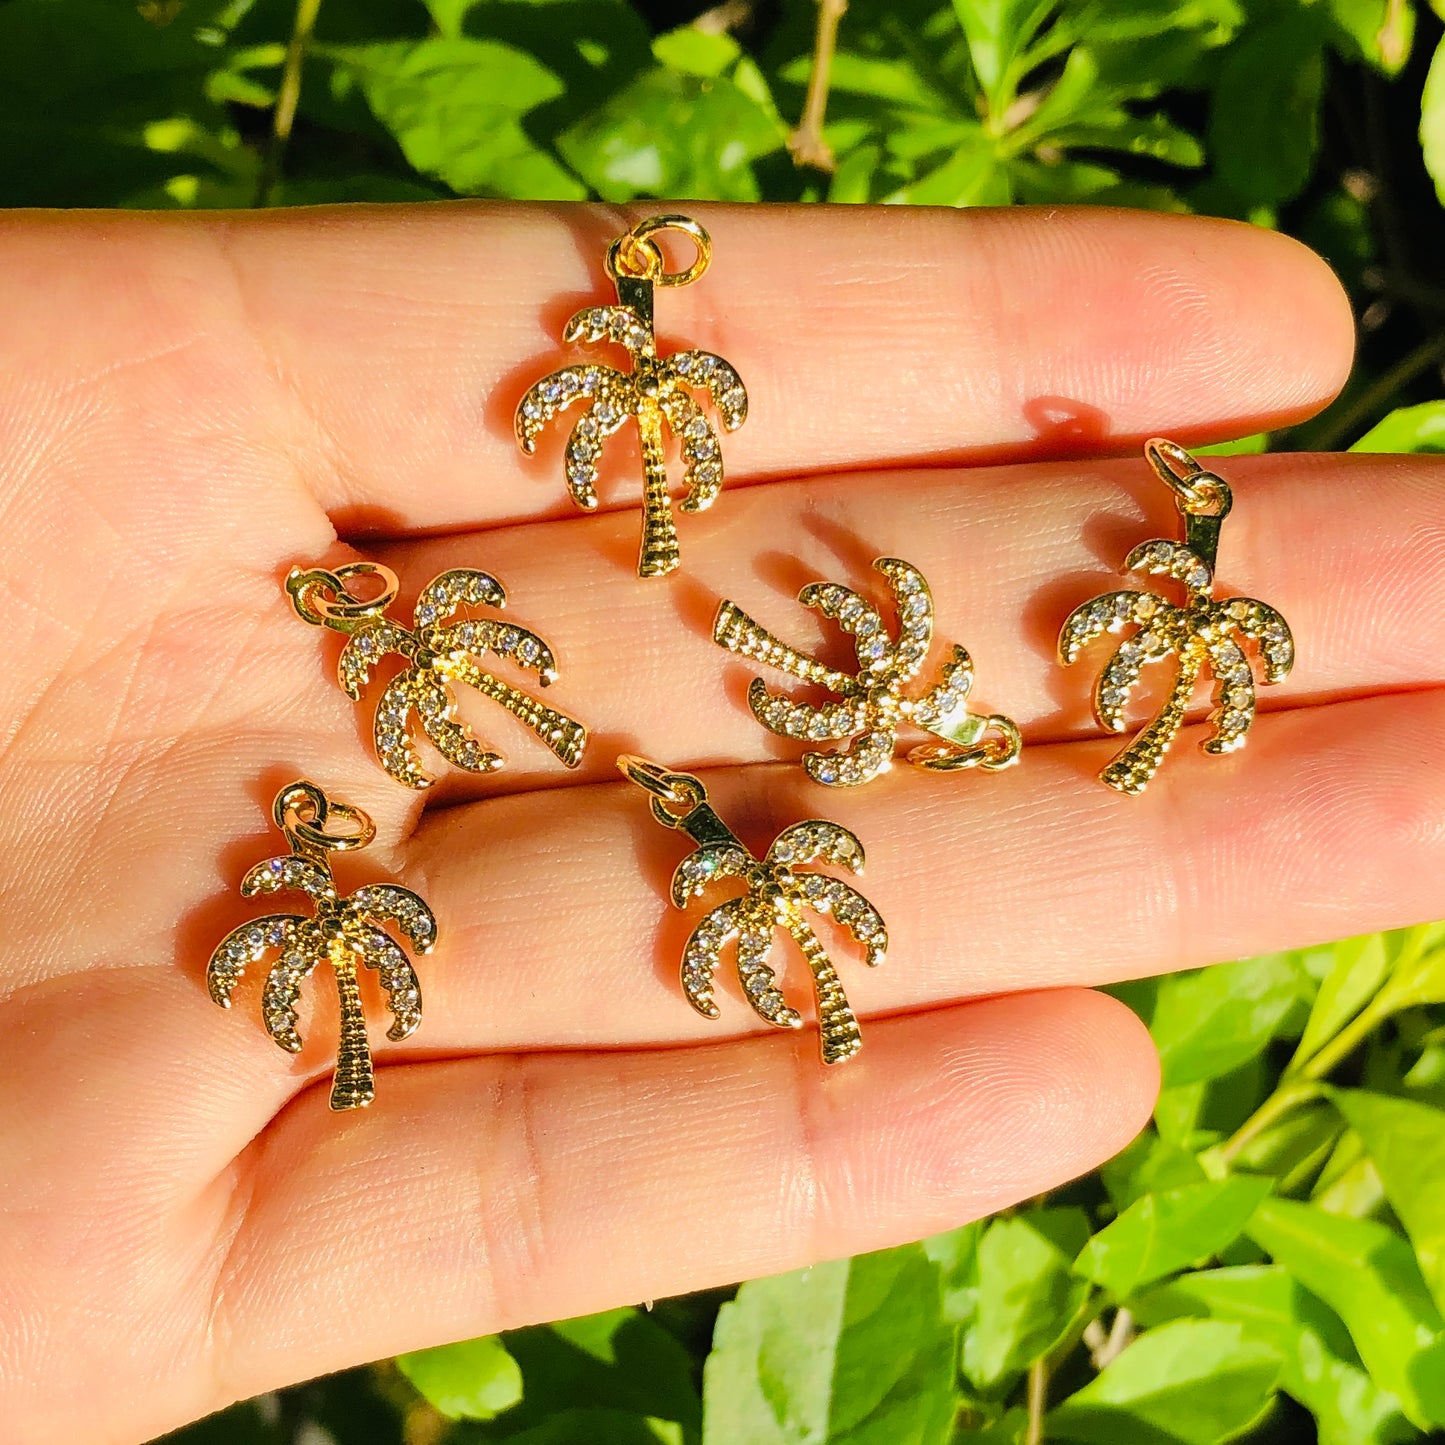 10pcs/lot 18.2*12.4mm CZ Paved Coconut Tree Charms CZ Paved Charms Flowers Small Sizes Charms Beads Beyond